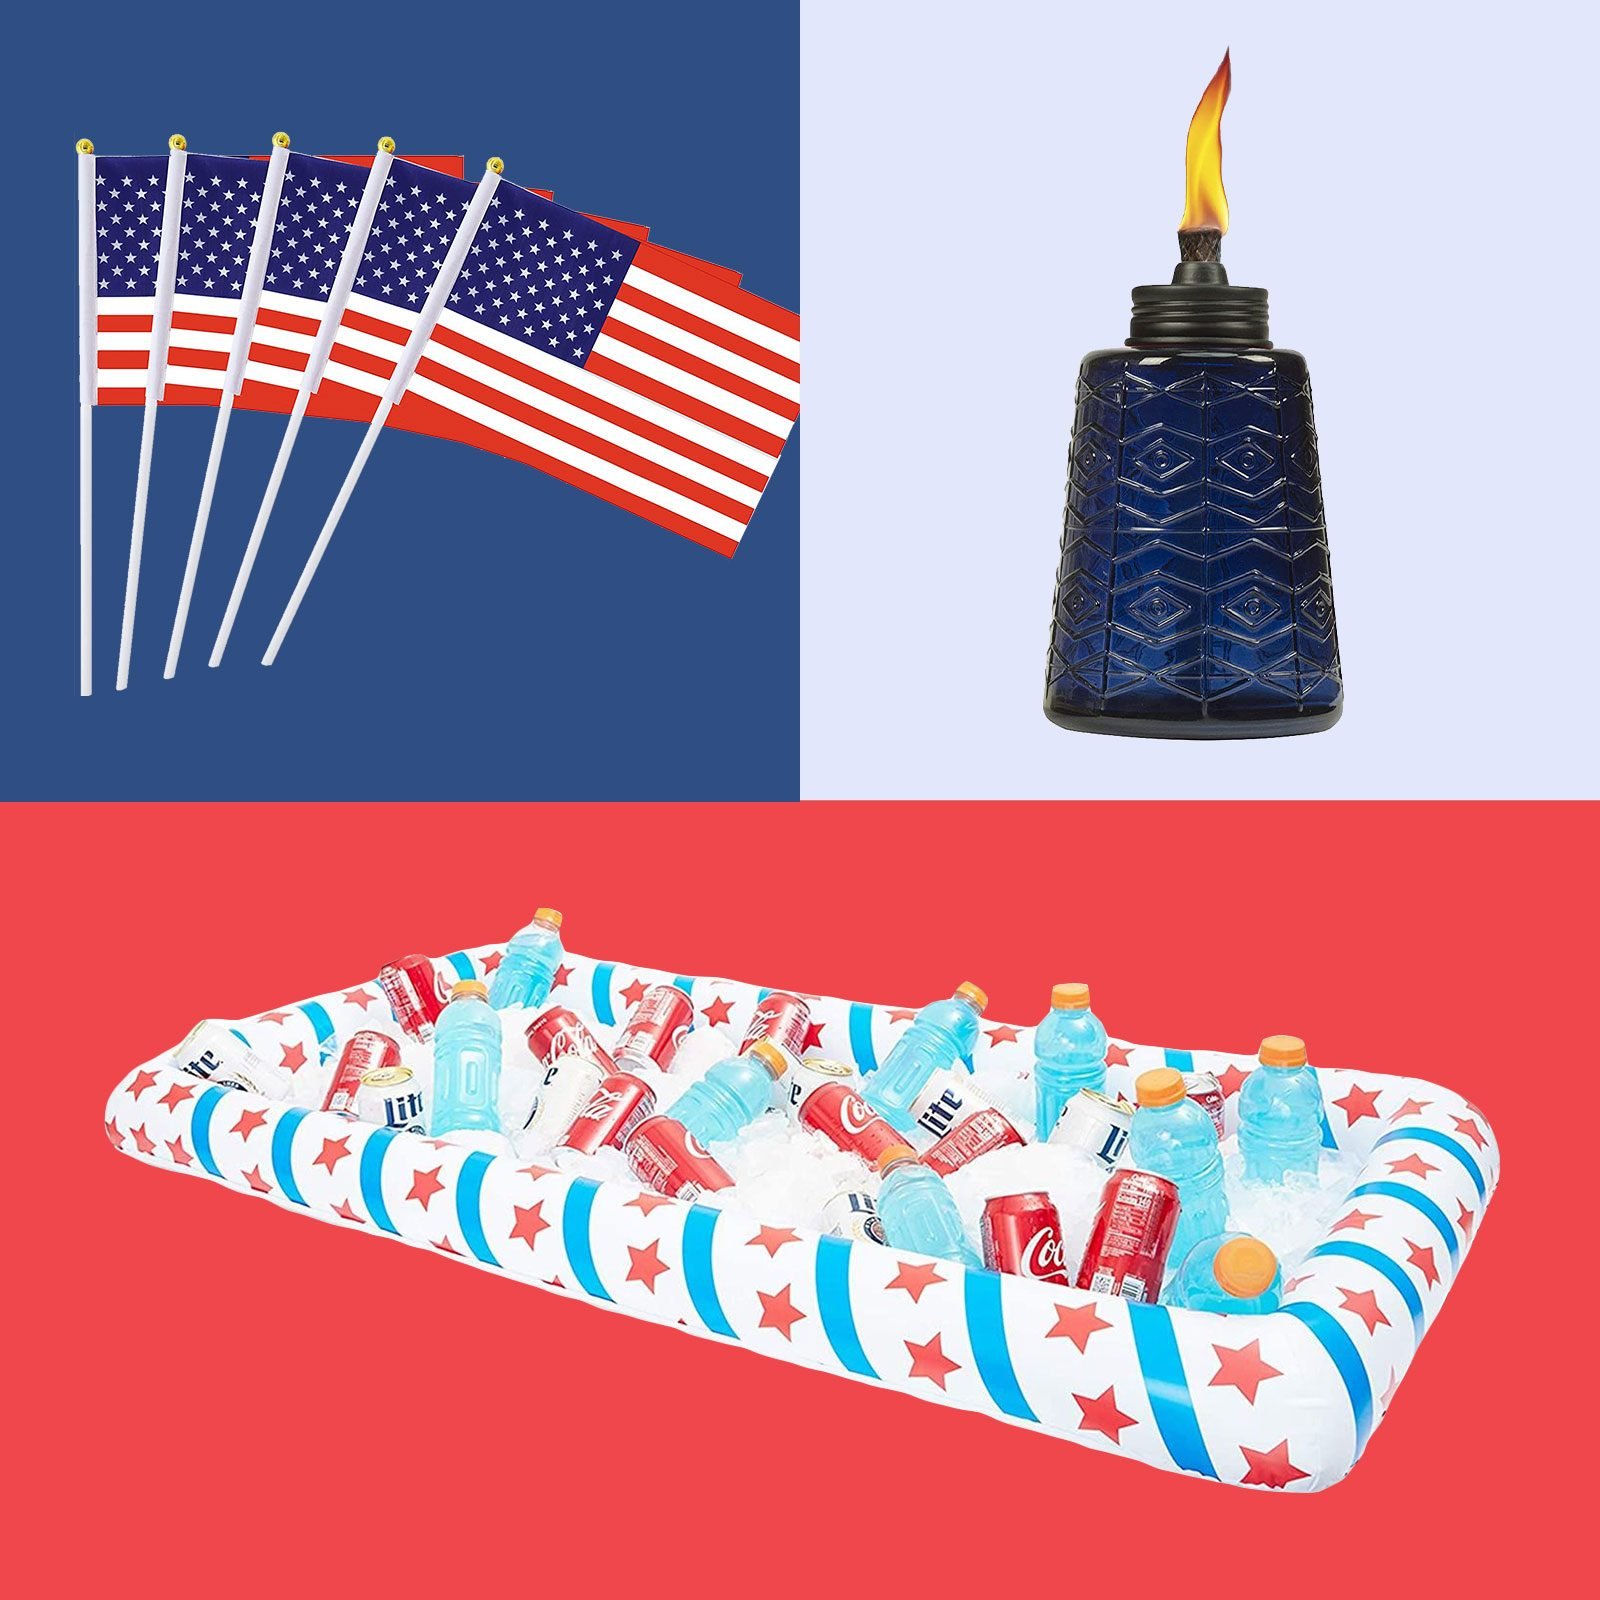 17 Red, White, and Blue Memorial Day Decorations